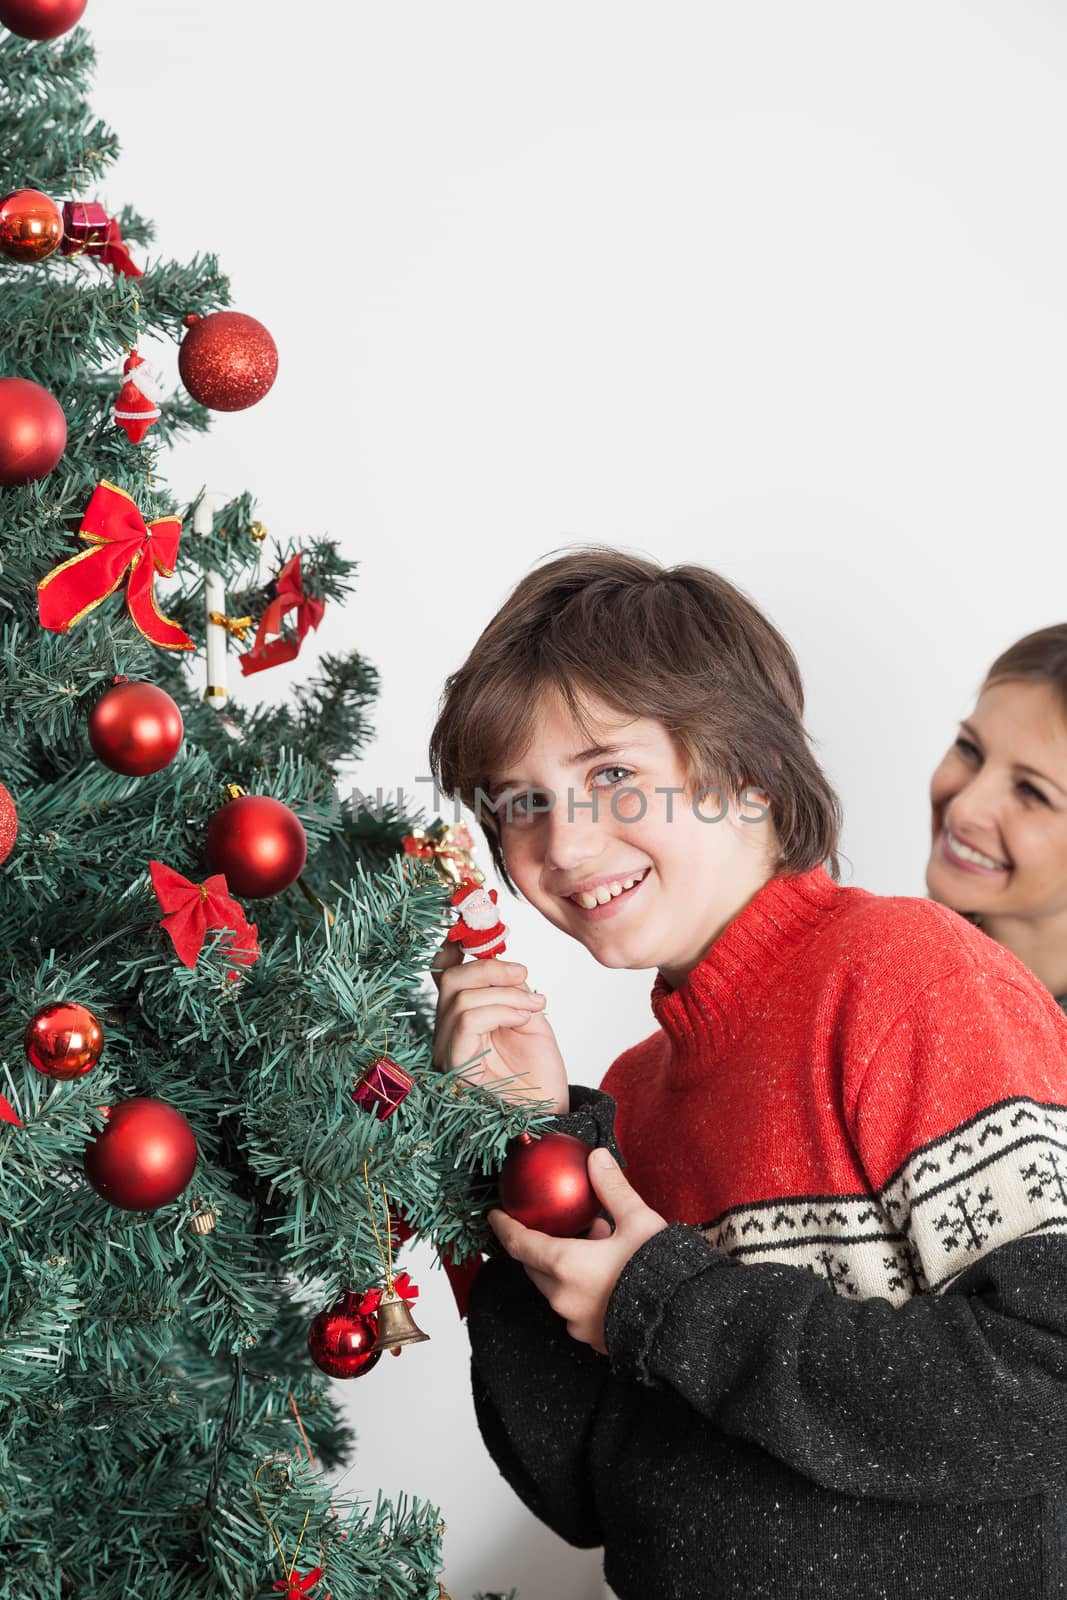 10-12, anticipation, backroud, ball, balls, boy, camera, casual, caucasian, christmas, christmastime, decorating, decorations, eyes, glass, green, holding, holiday, home, indoors, juice, look, looking, male, model, old, people, property, red, releases, situation, teenager, tree, vertical, white, years